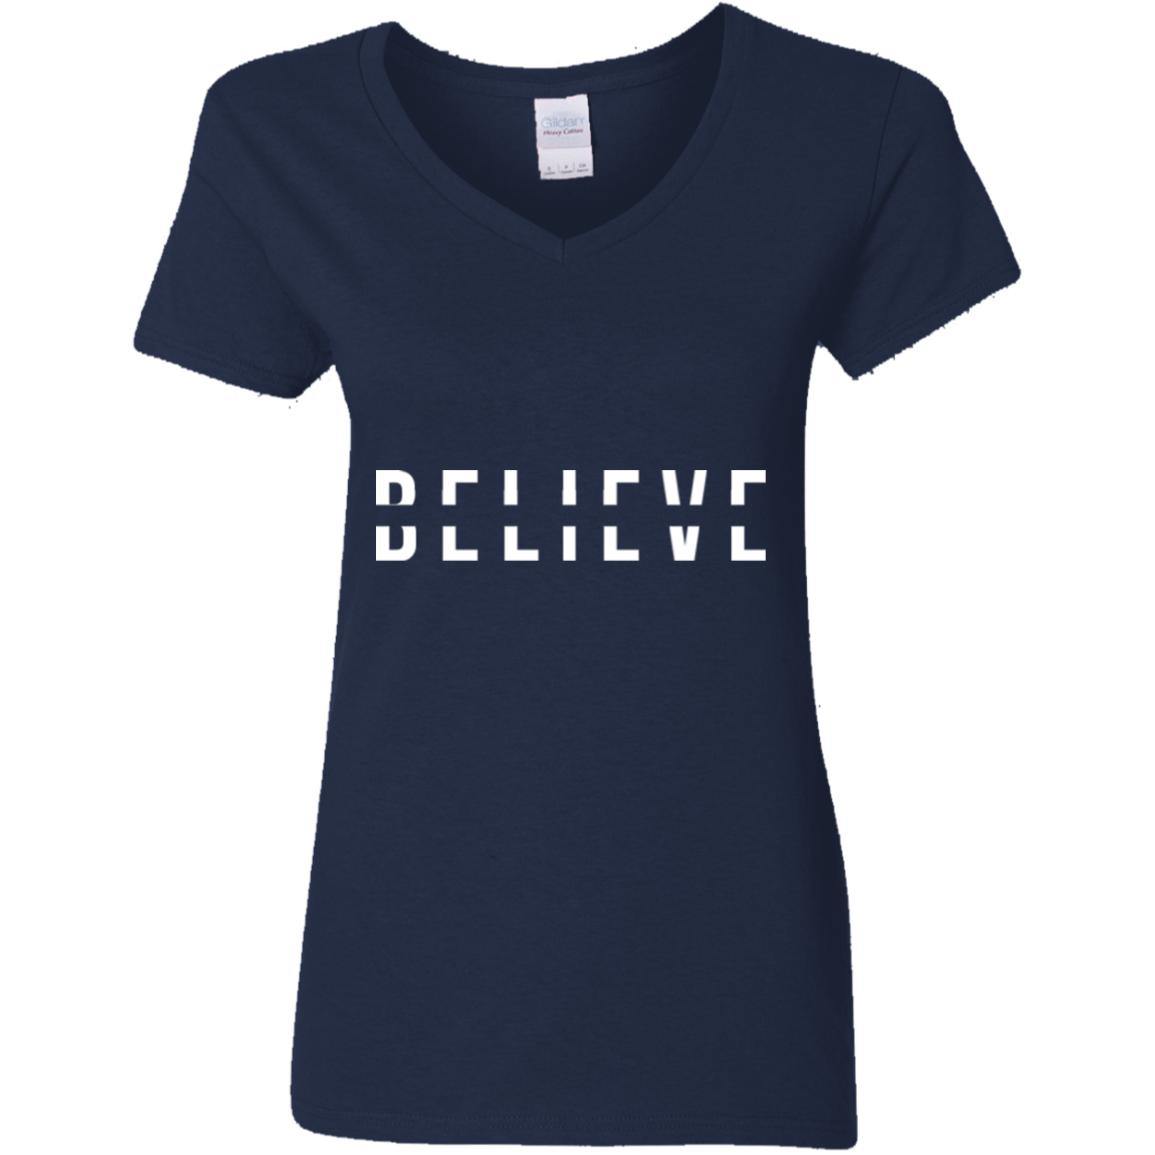 BELIEVE Ladies' V-Neck T-Shirt - Wear What Inspires You